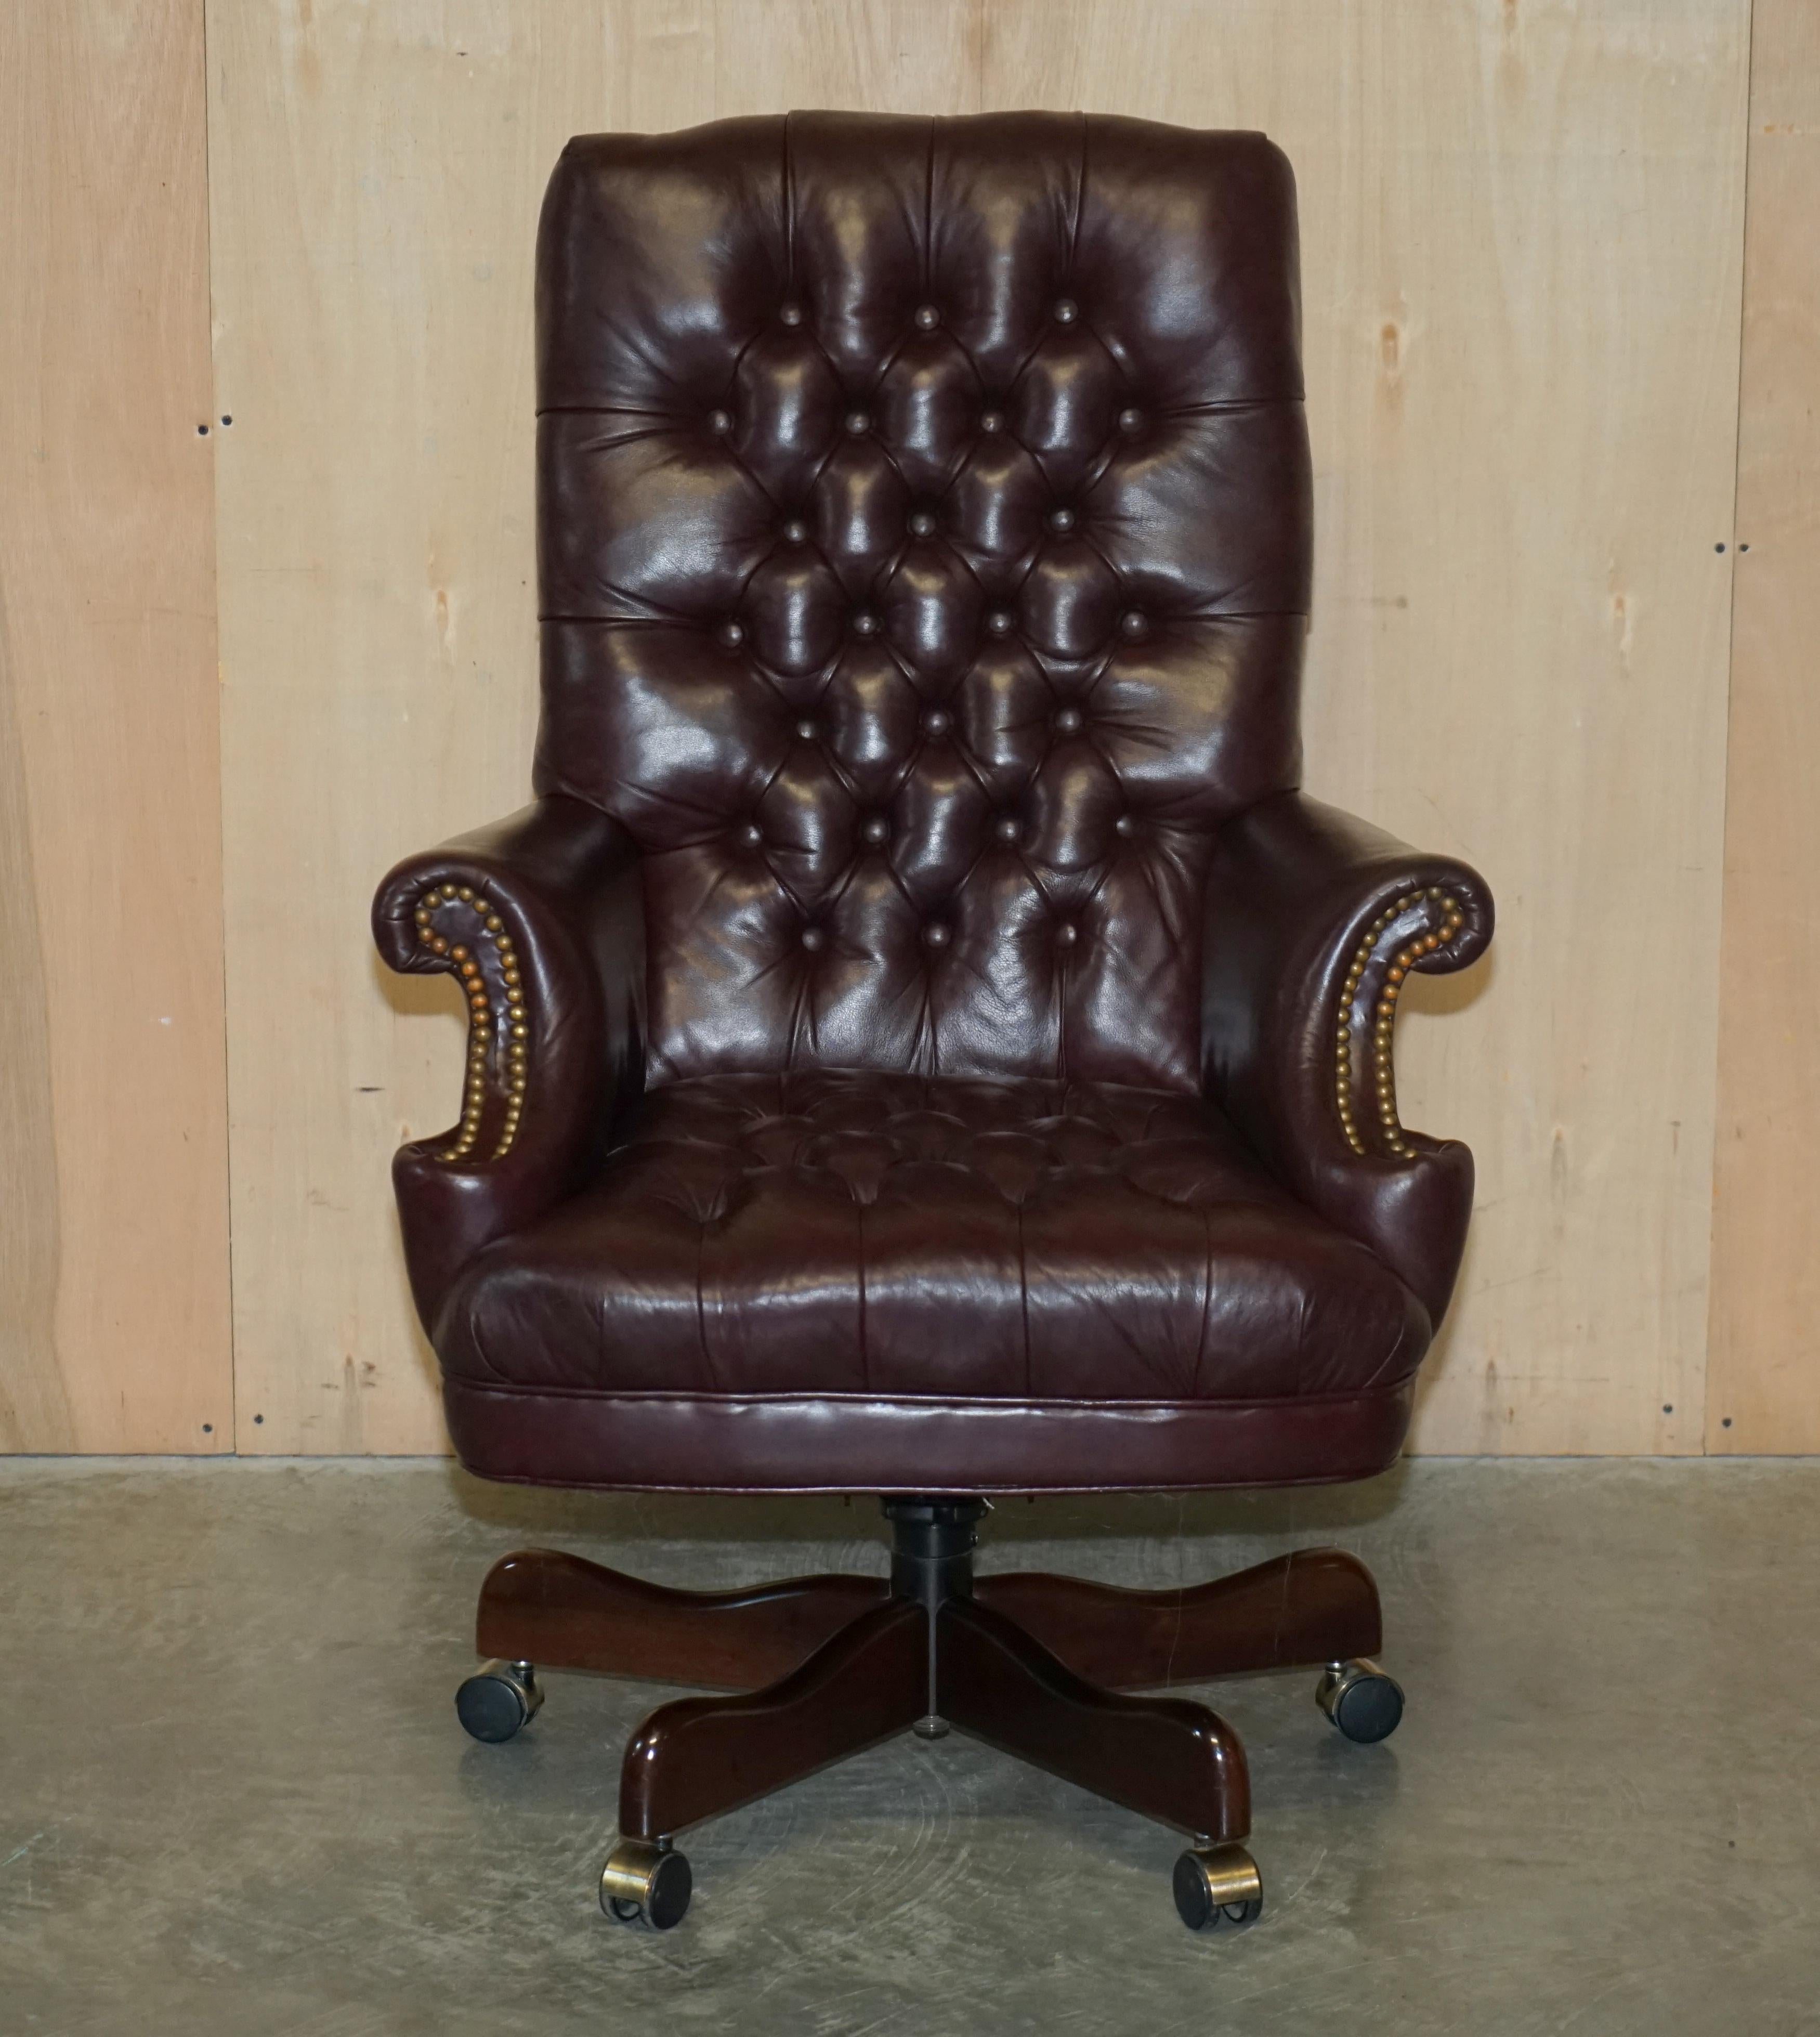 We are delighted to offer for sale this lovely, large, very comfortable Chesterfield leather wing style office armchair

This is a very comfortable captain’s indeed, it’s like your favourite reading chair with wheels. This was retailed through